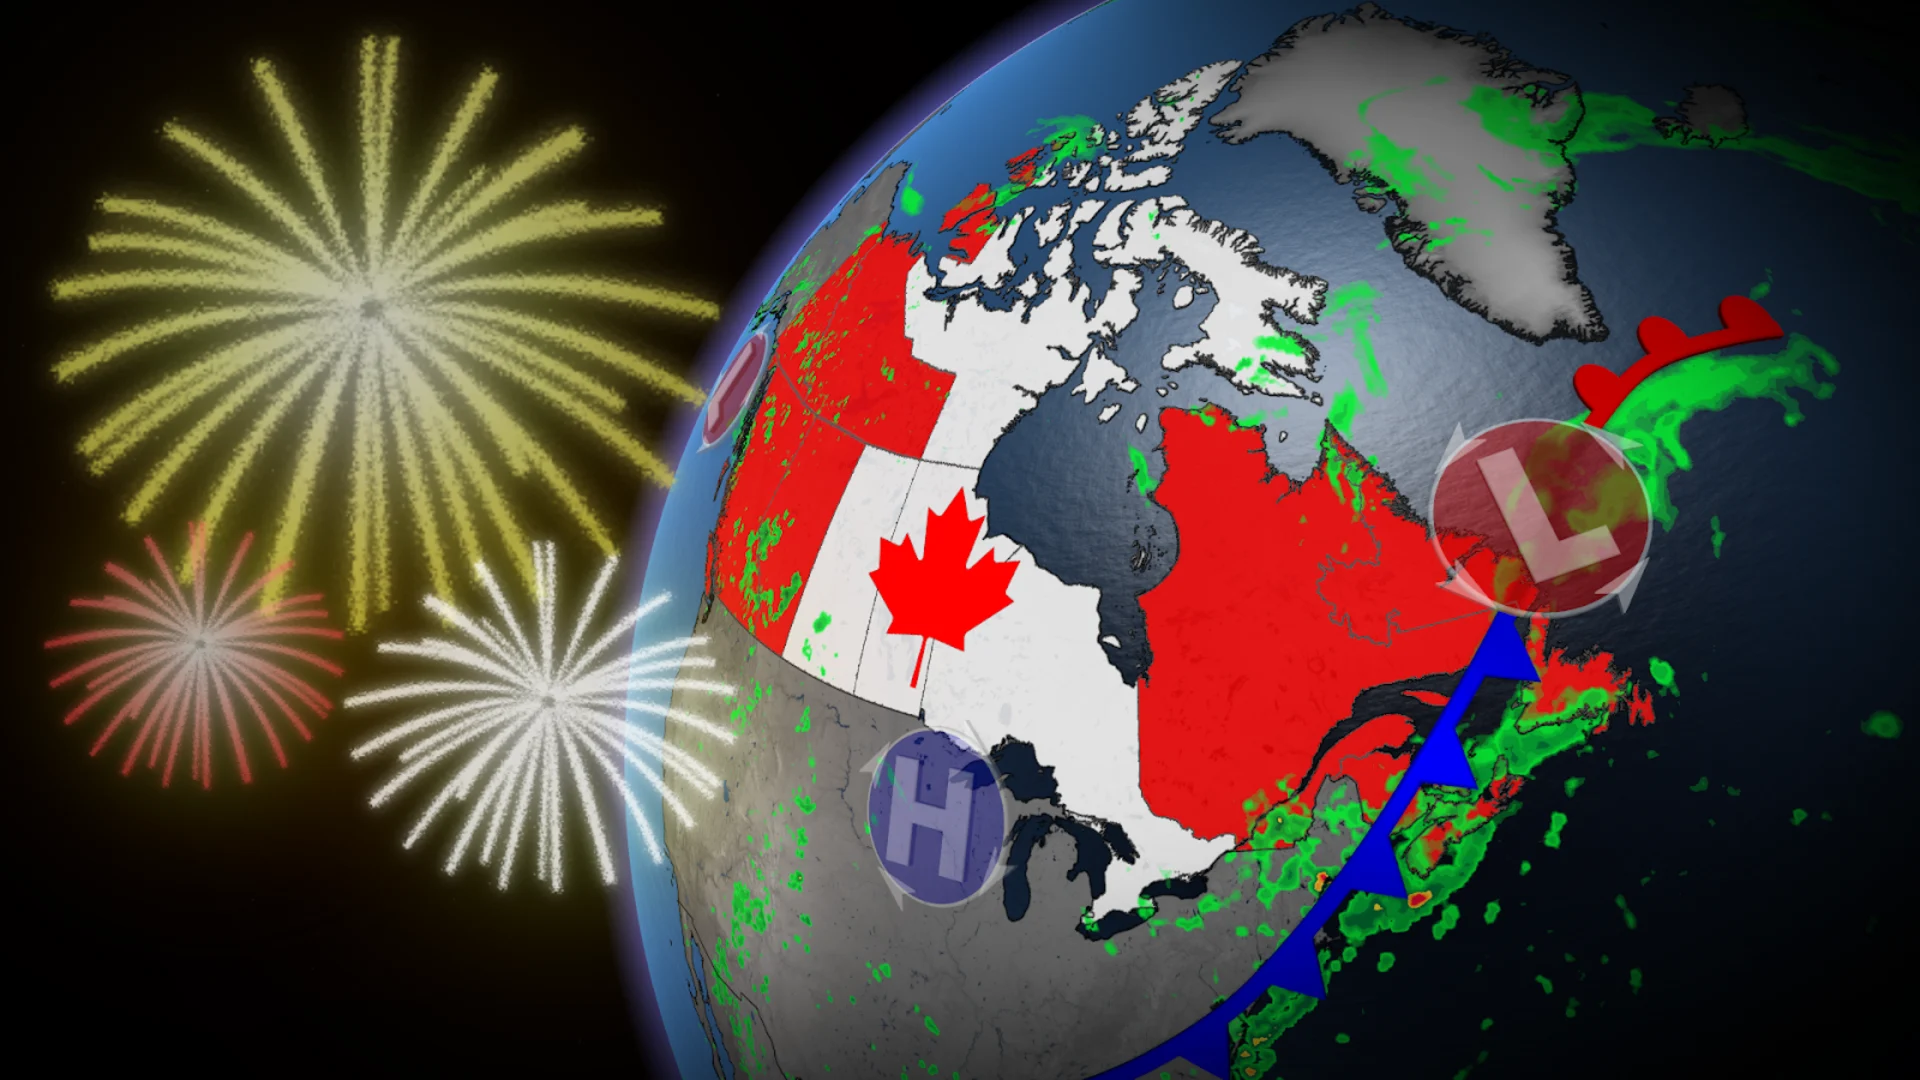 Showers or sunshine? See what's in store for your weather across B.C. this Canada Day long weekend, here